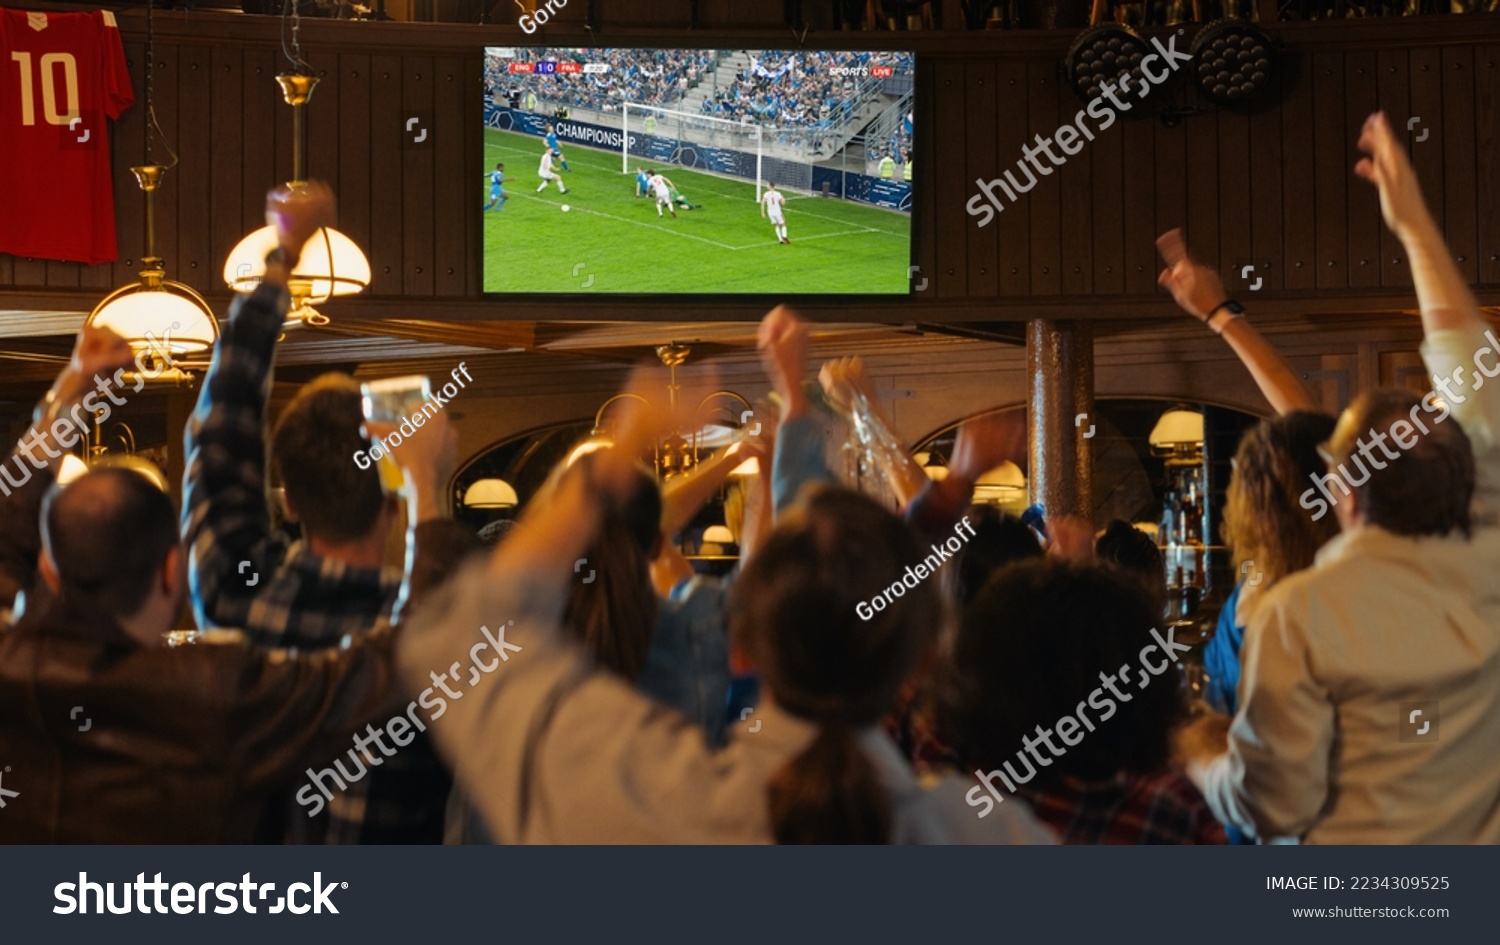 Group of Soccer Fans Cheering, Screaming, Raising Hands and Jumping During a Football Game Live Broadcast in a Sports Pub. Player in Blue Shirt Scores a Goal and Friends Celebrate. Slow Motion Footage #2234309525